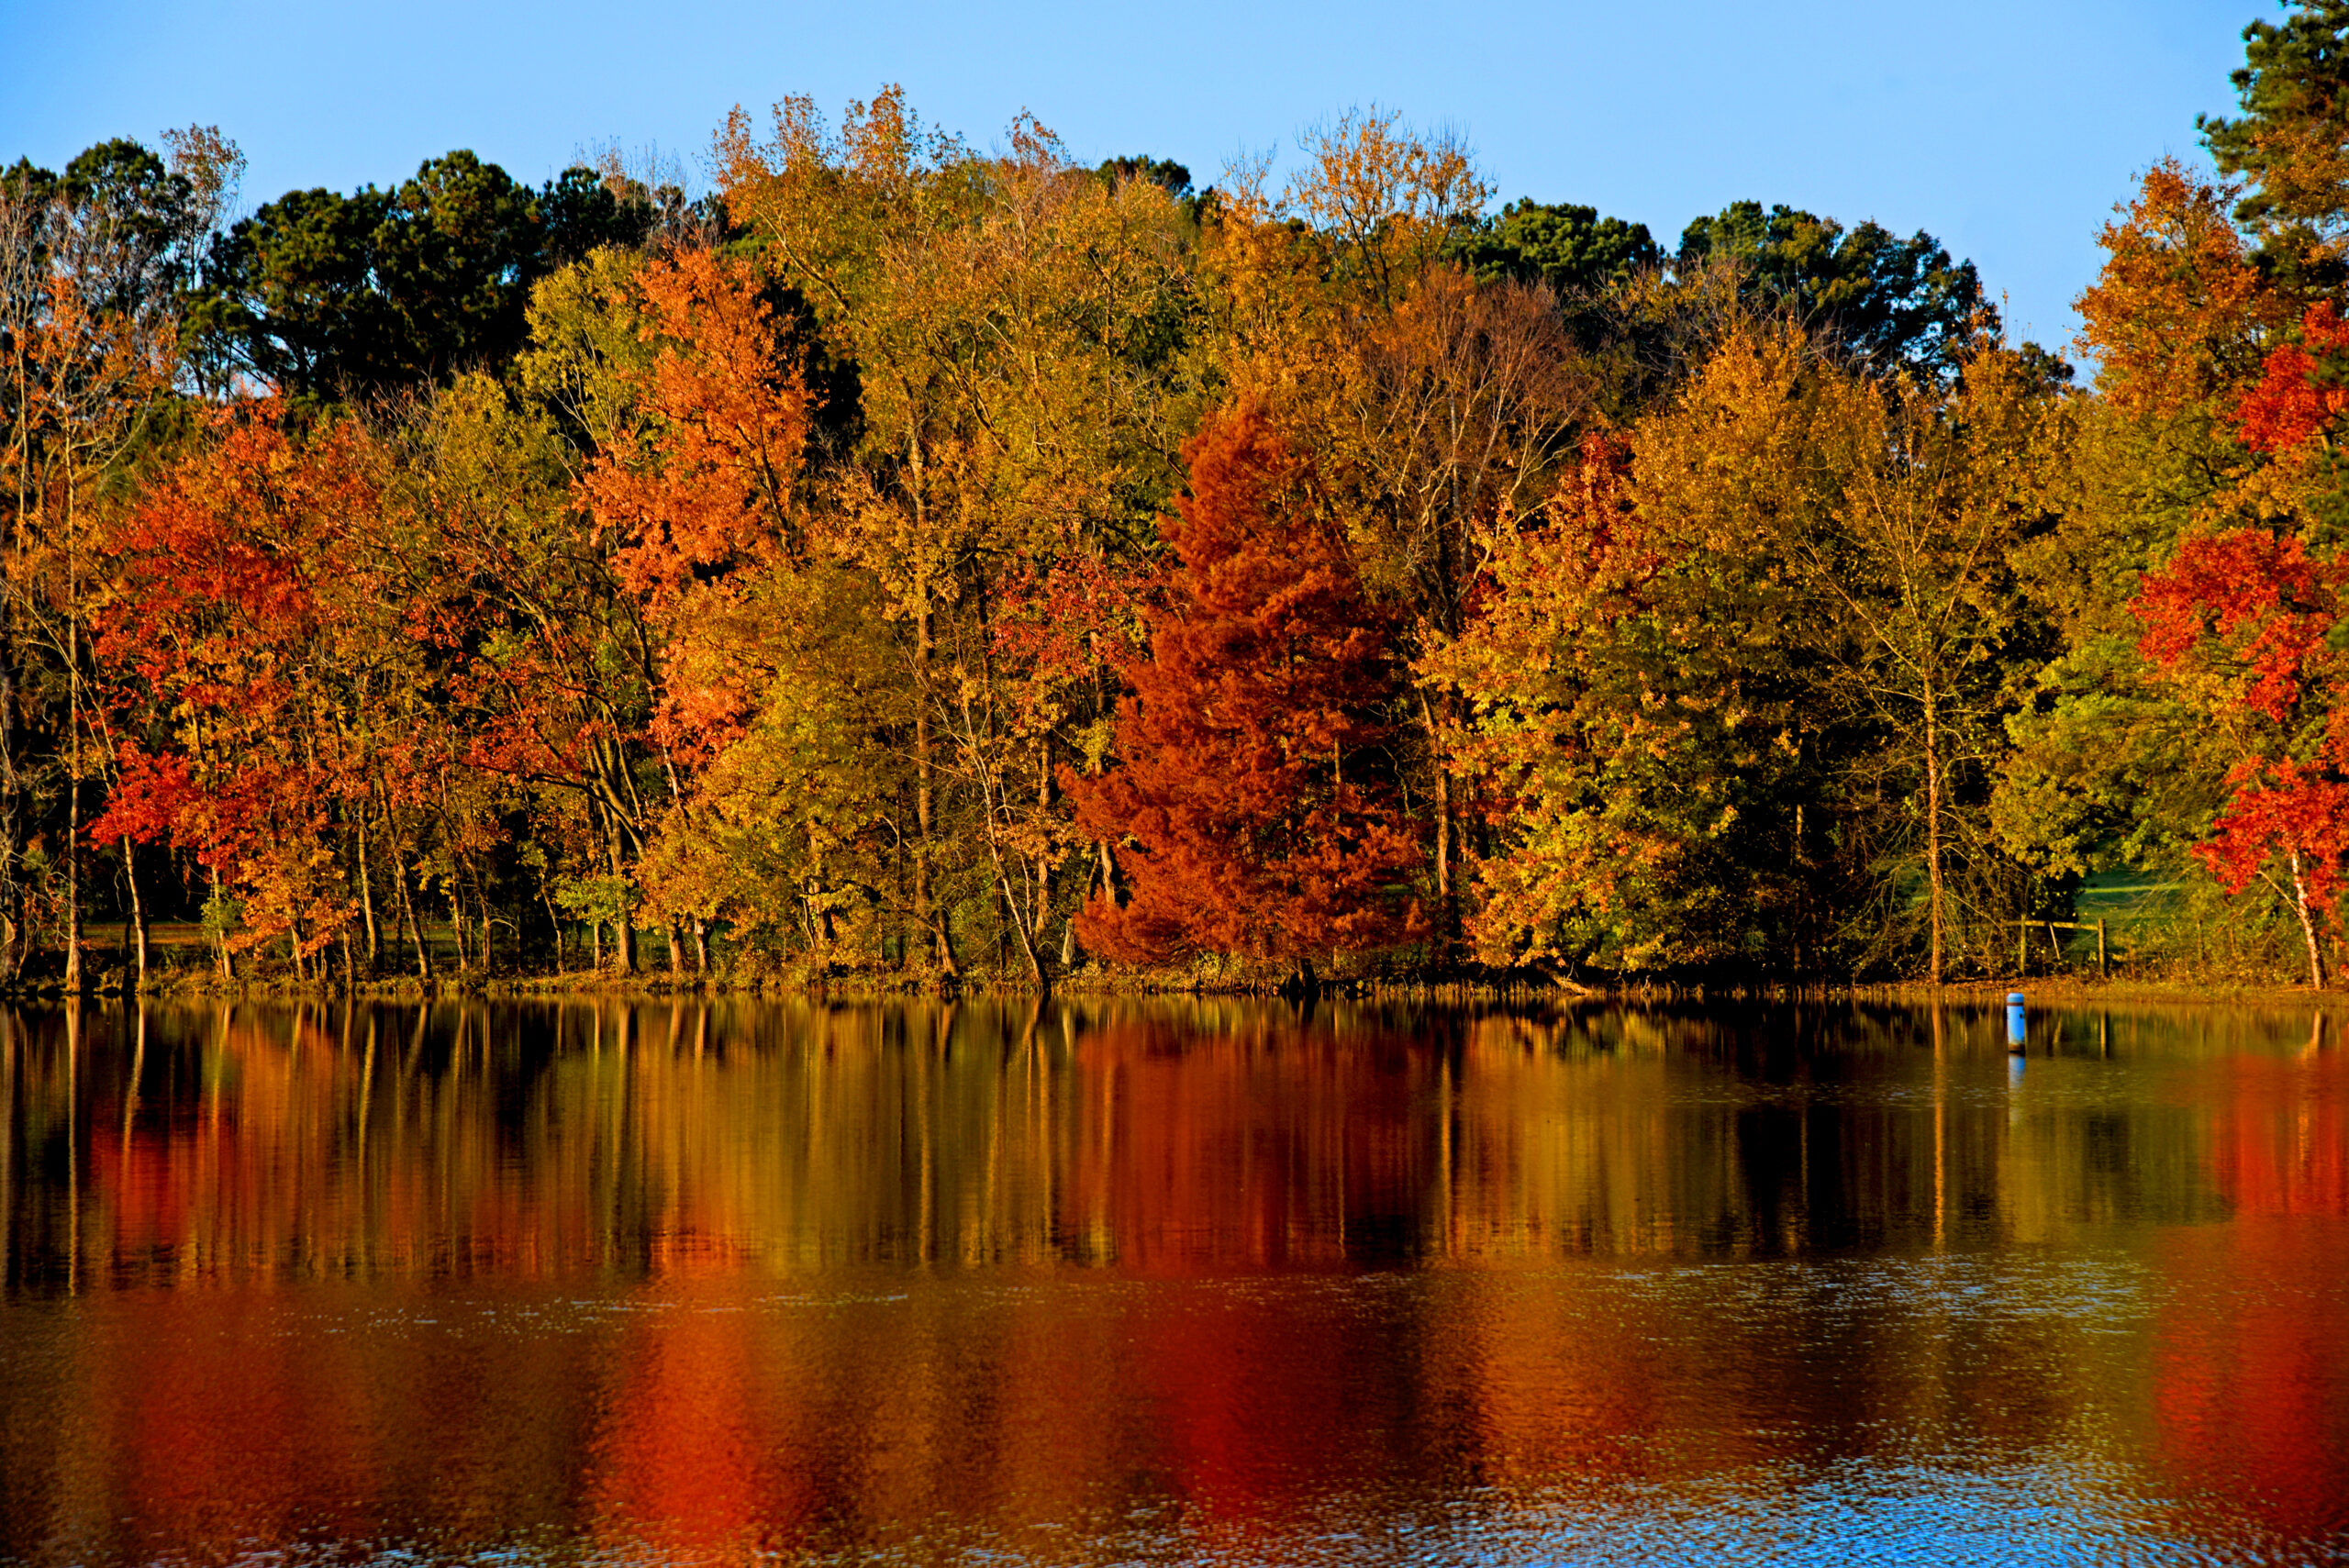 image: lake amidst fall oranges and reds. Courtesy of NC State University Photos.